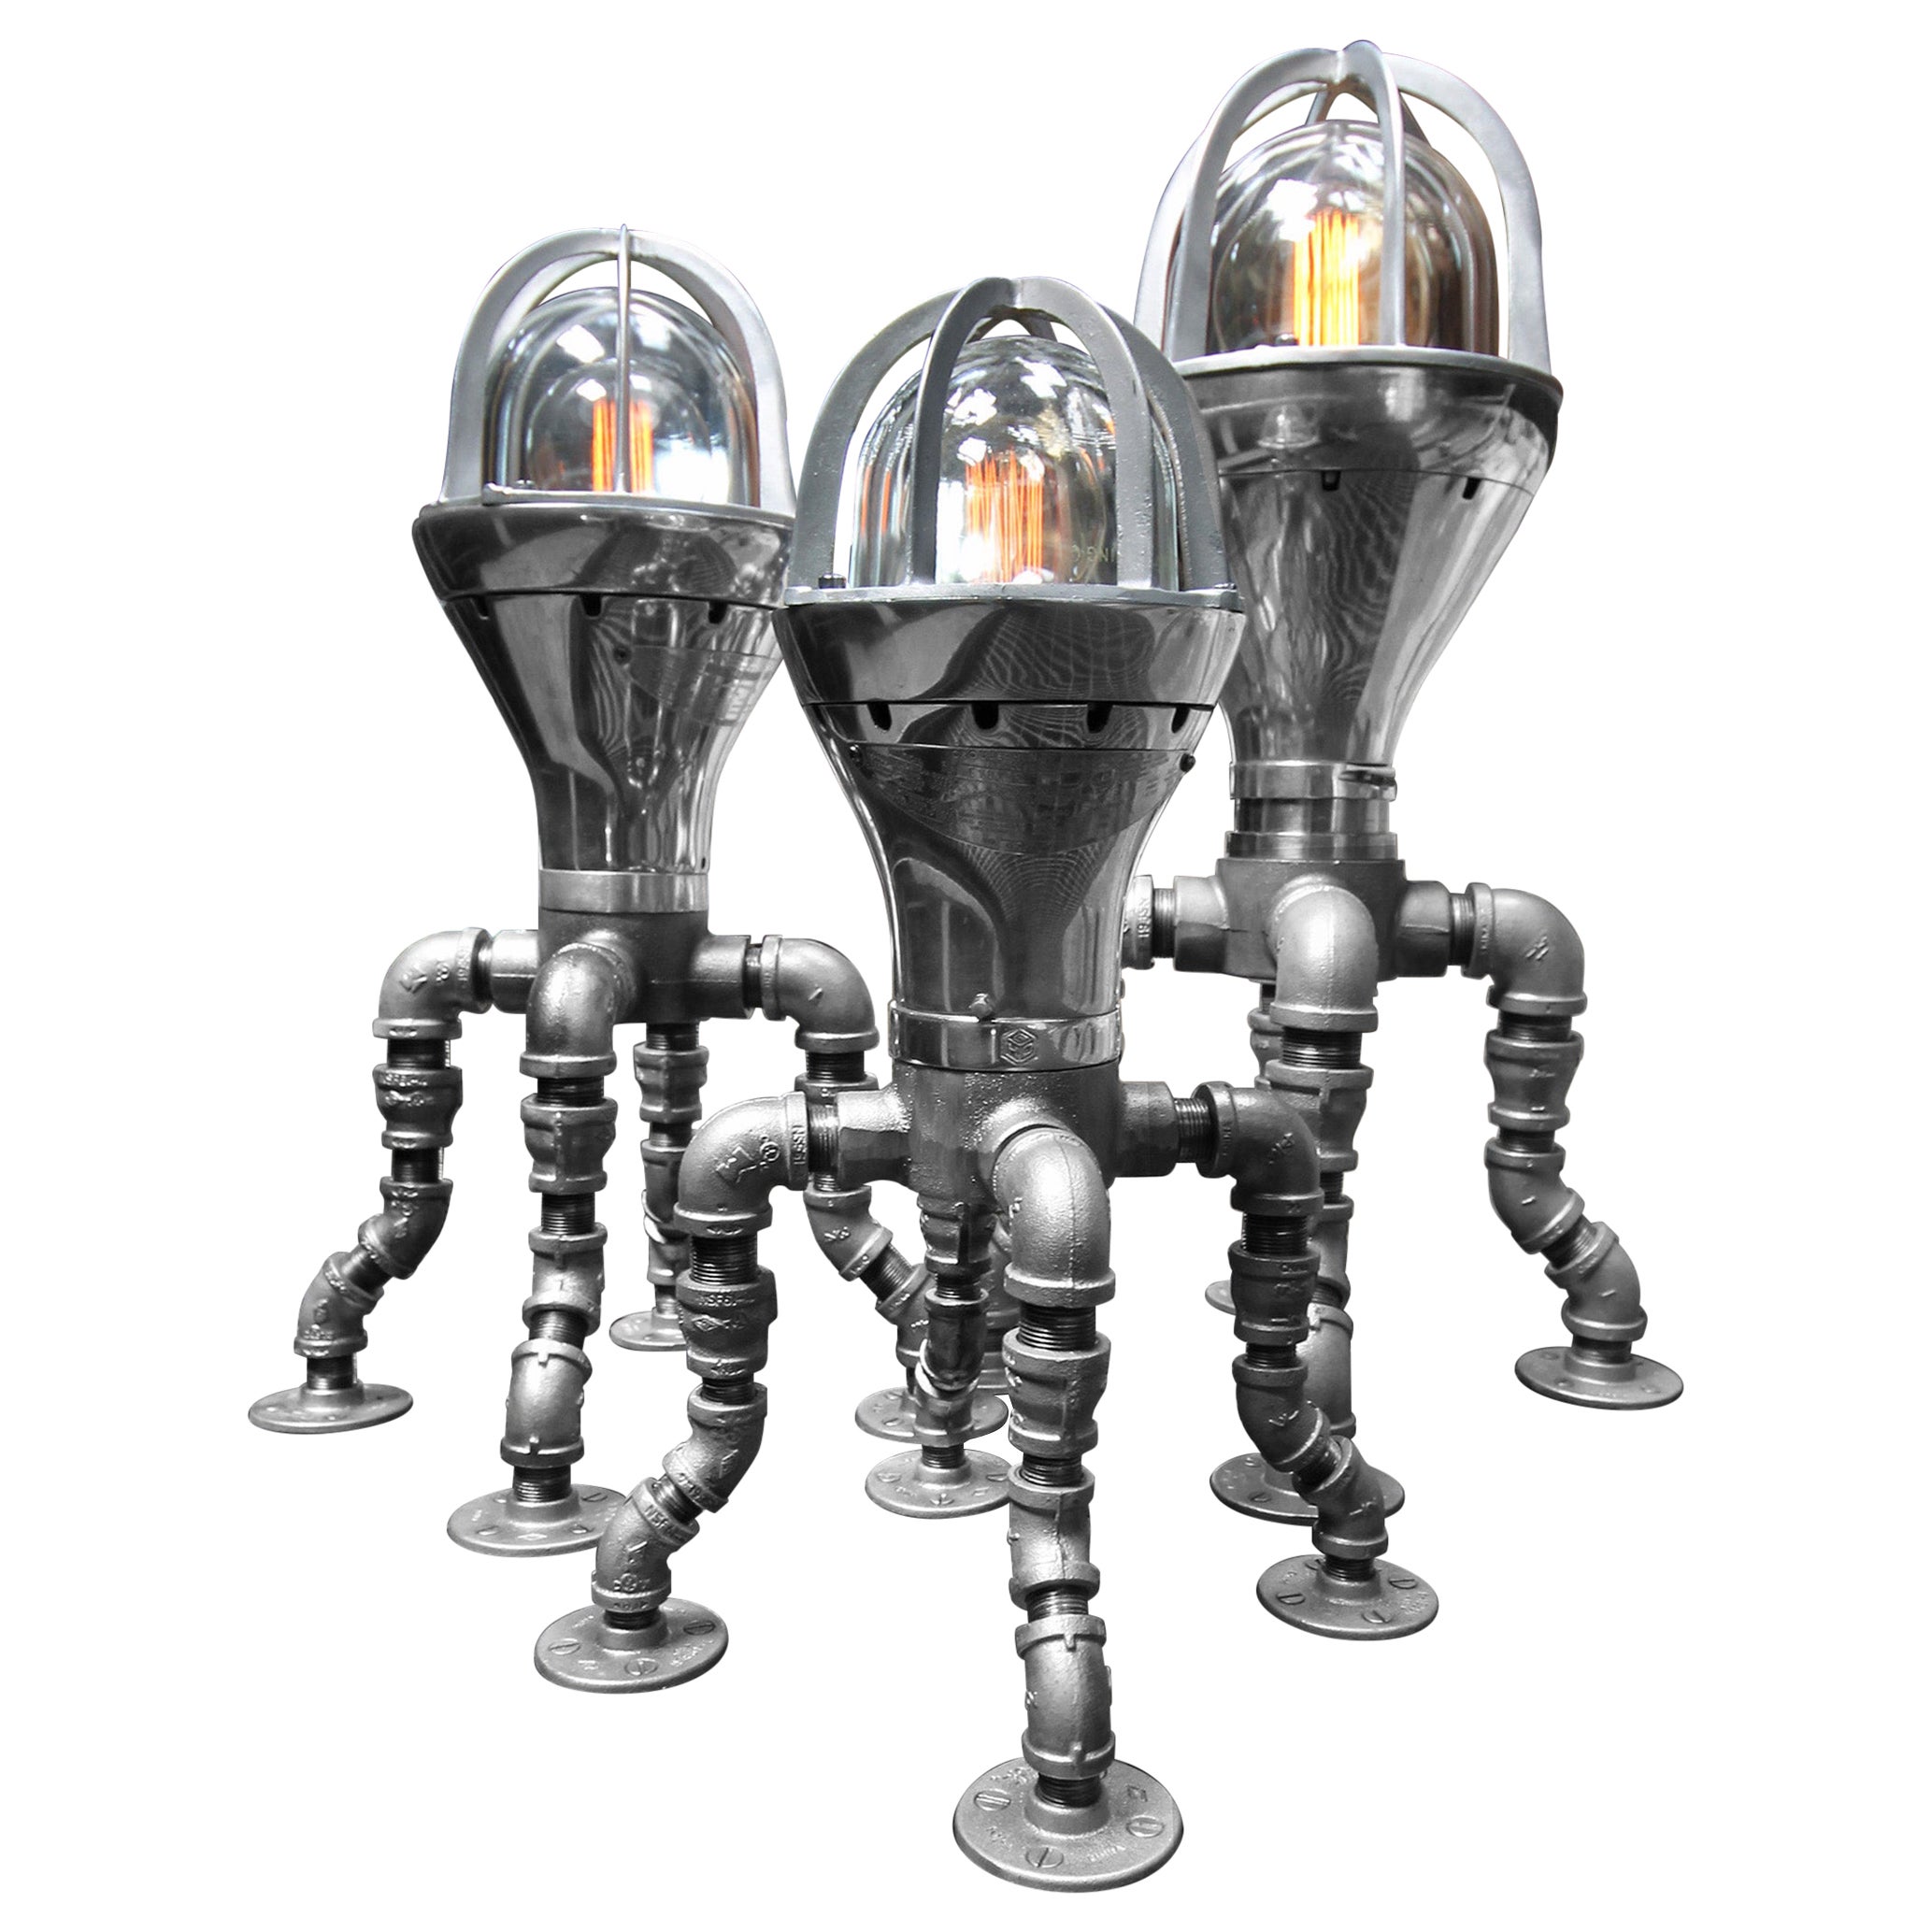 Modern Industrial Lamp Set - Industrial Decor - Crouse Hinds Industrial Light For Sale